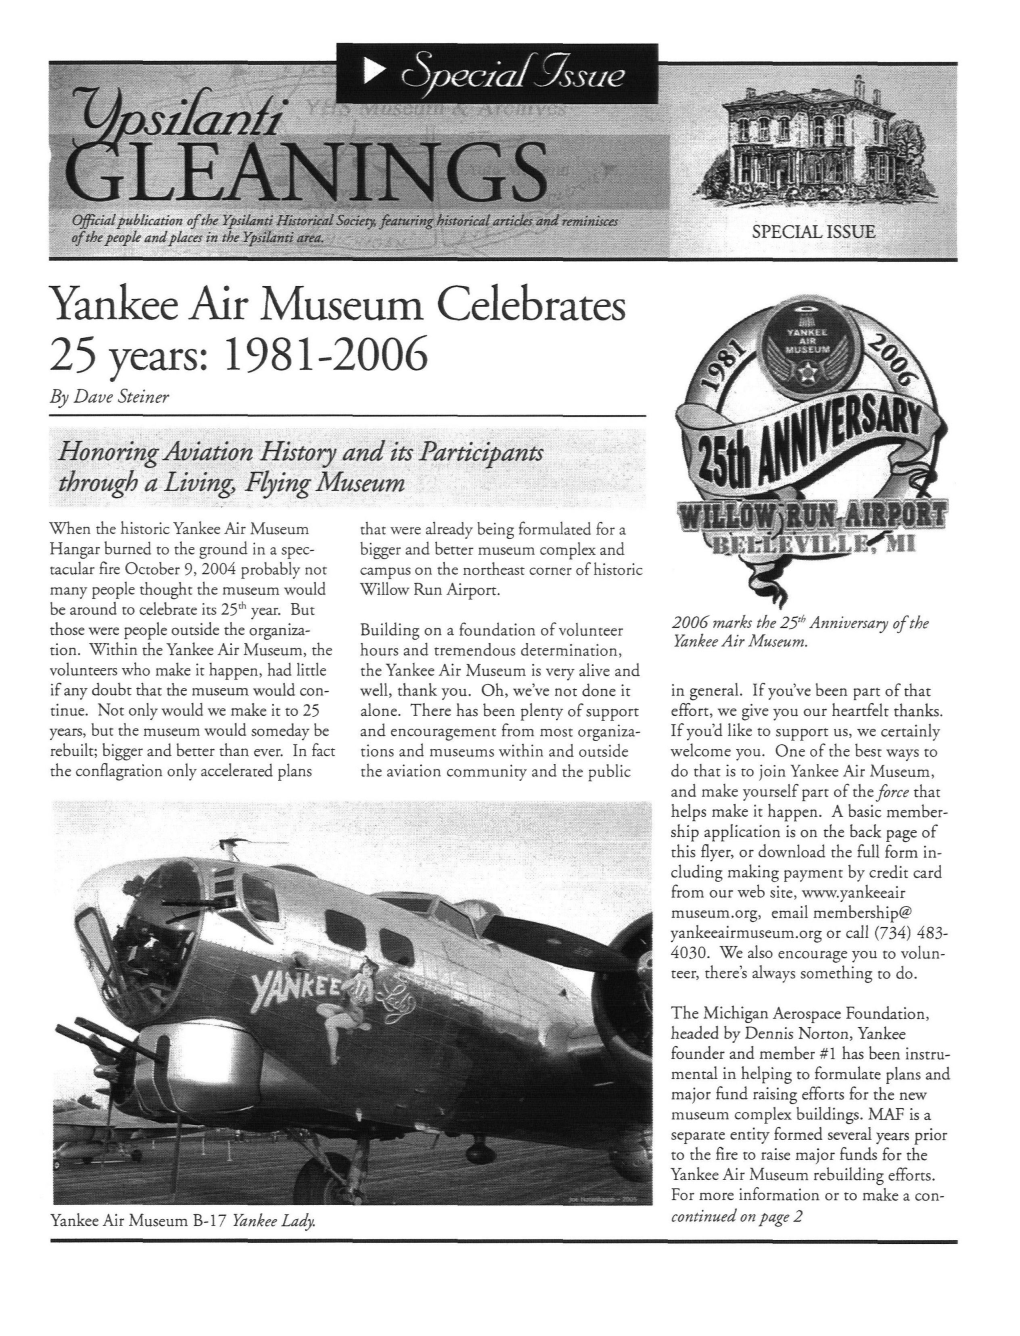 LEANINGS Official Publication Ofthe Ypsuanti Historical Society, Featuring Historical Articles and Reminisces of the People Andplaces in the Ypsilanti Area